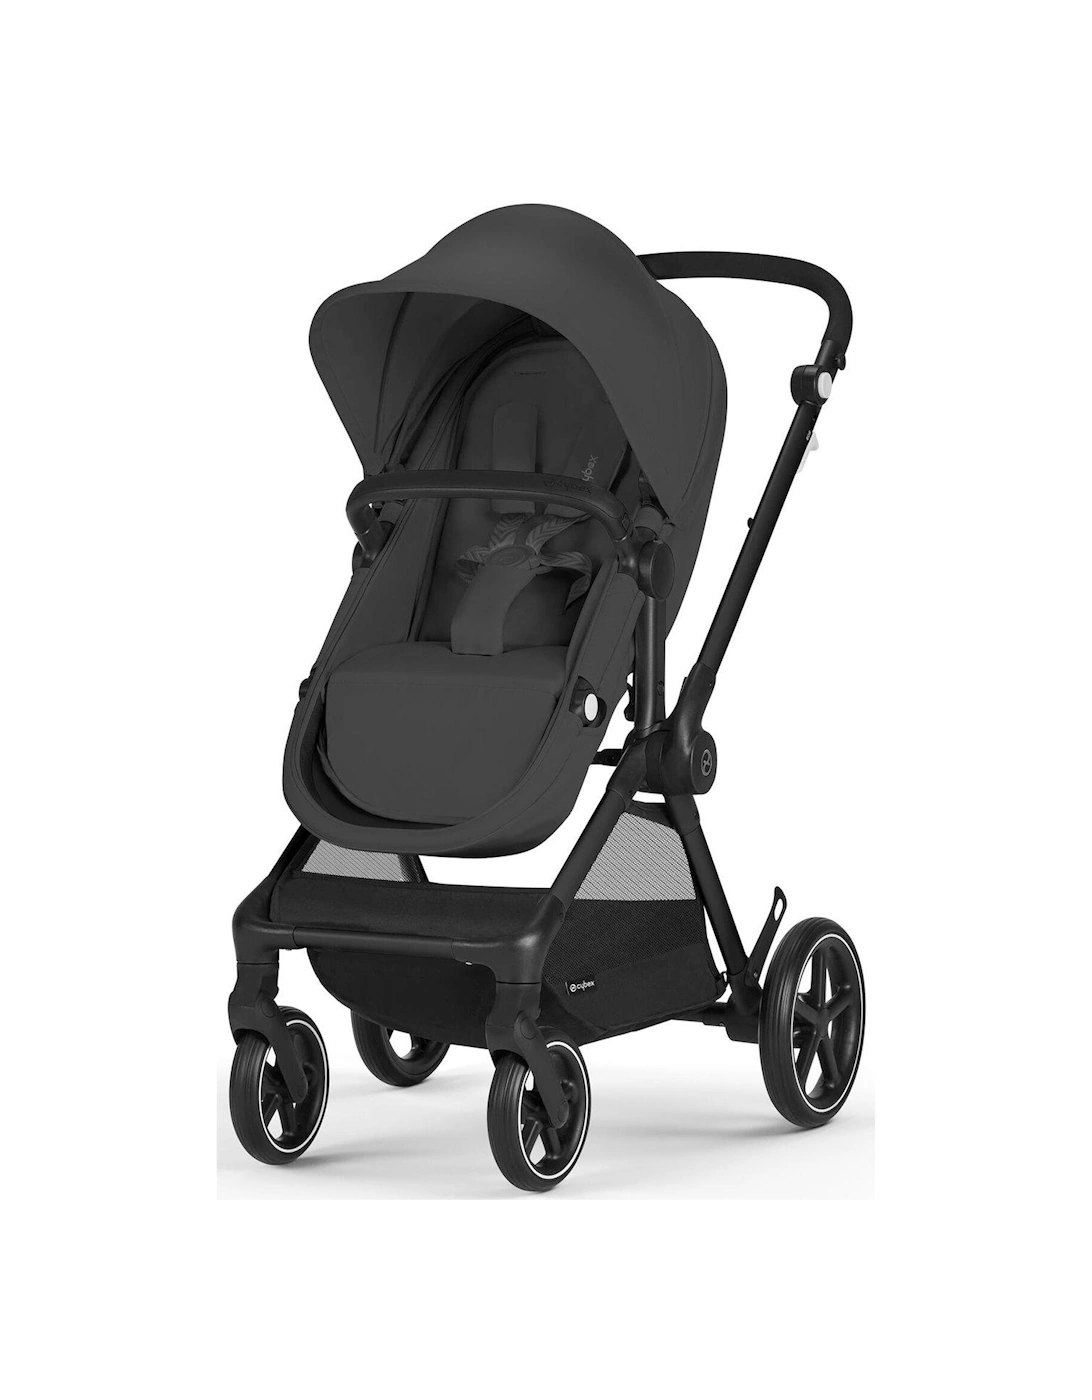 EOS 2-in-1 Pushchair Bundle Travel System with R129 Aton B2 i-Size Car Seat